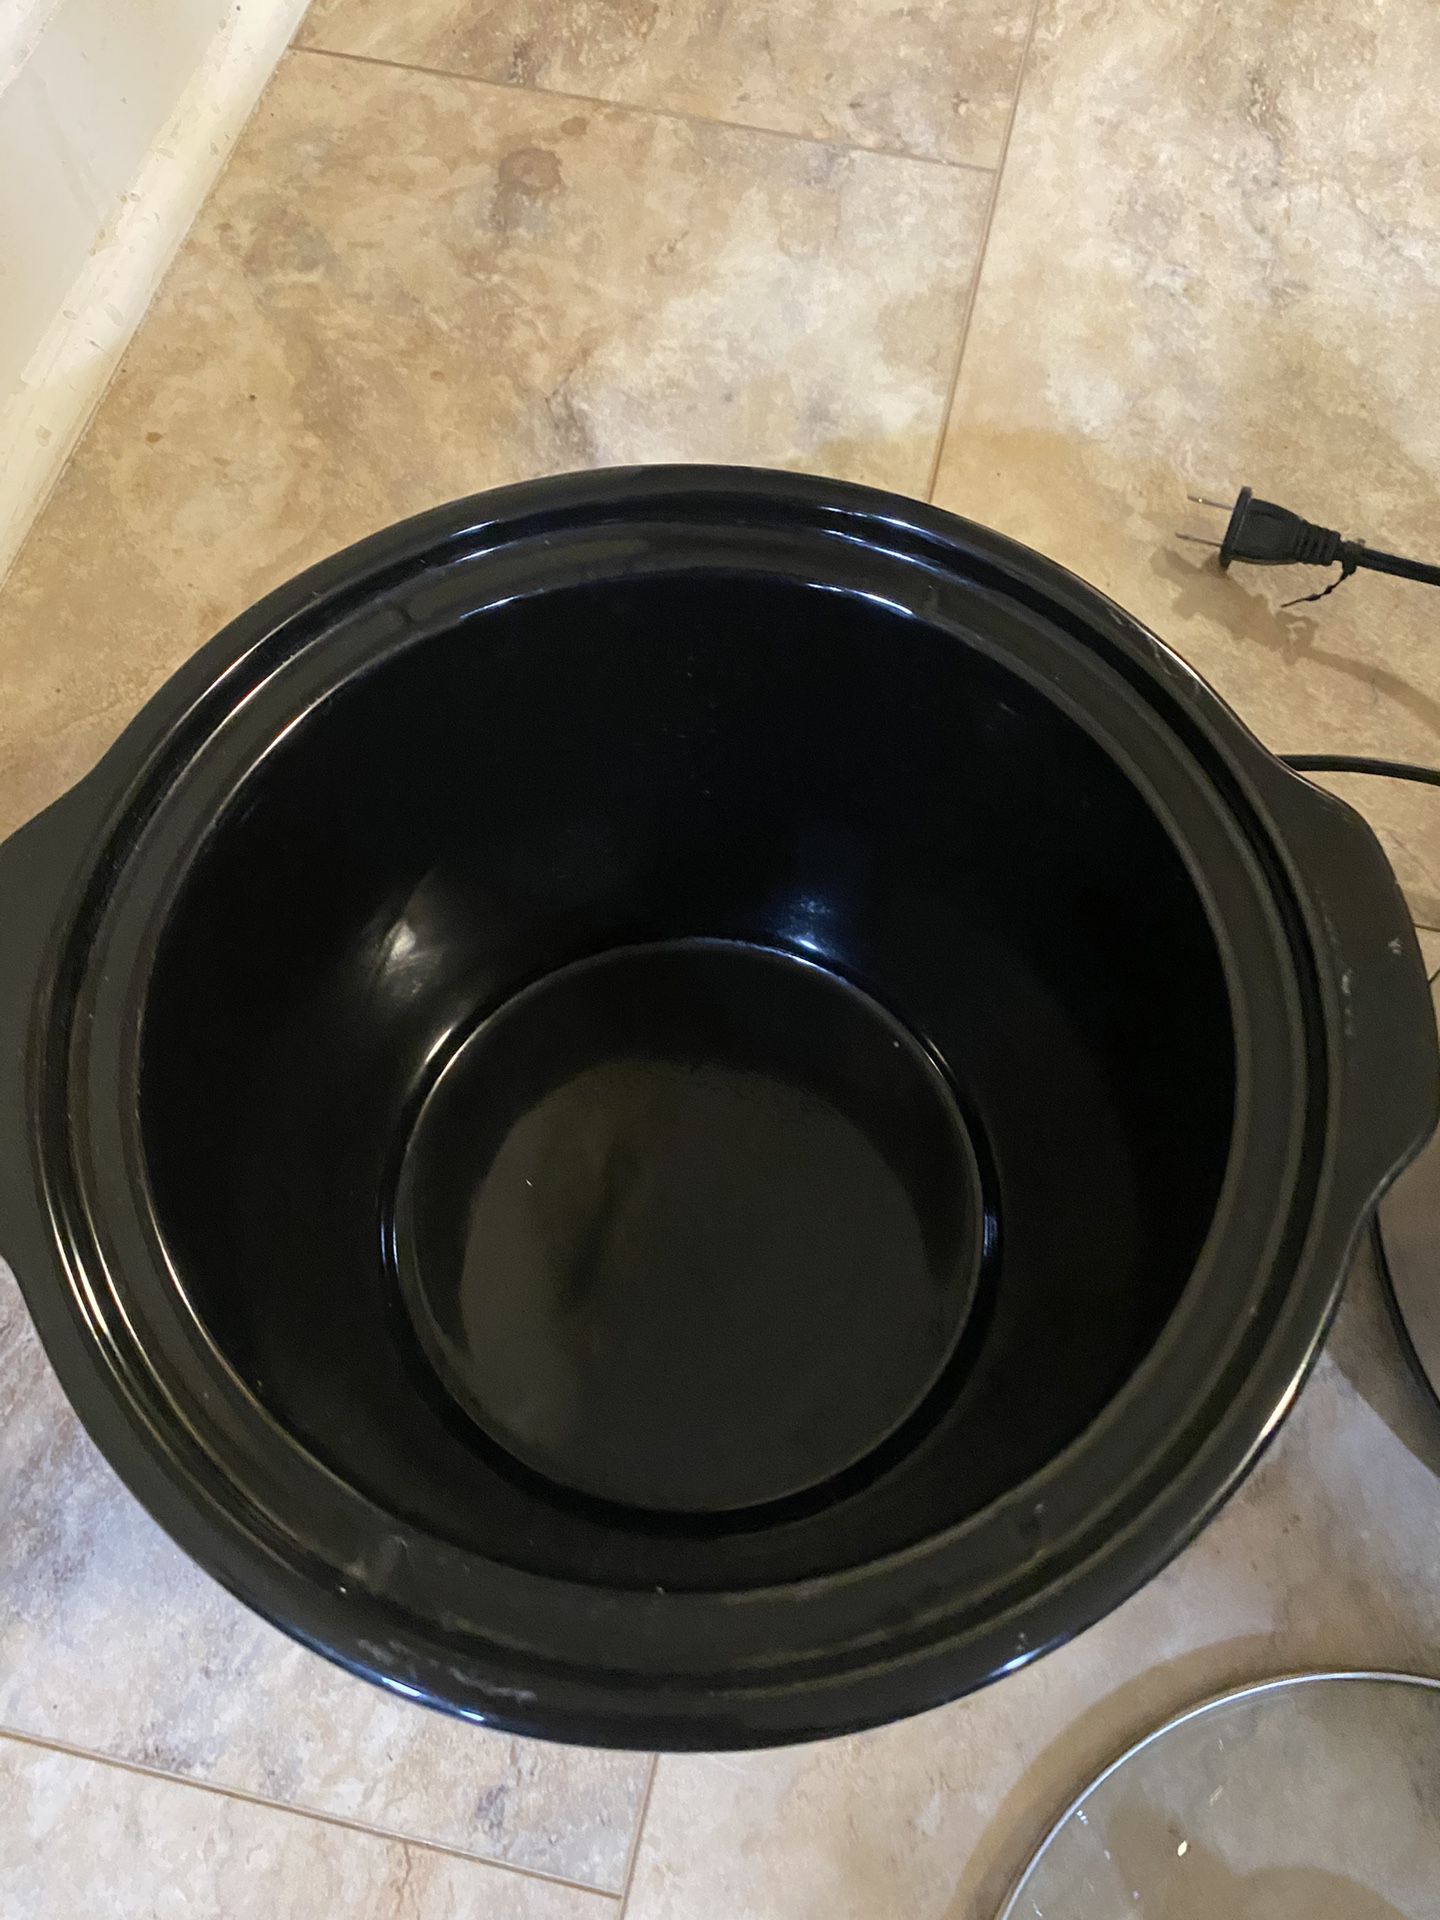 RIVAL. CROCK-POT. 2 1/2. QUART SLOW COOKER. NEW for Sale in High Point, NC  - OfferUp